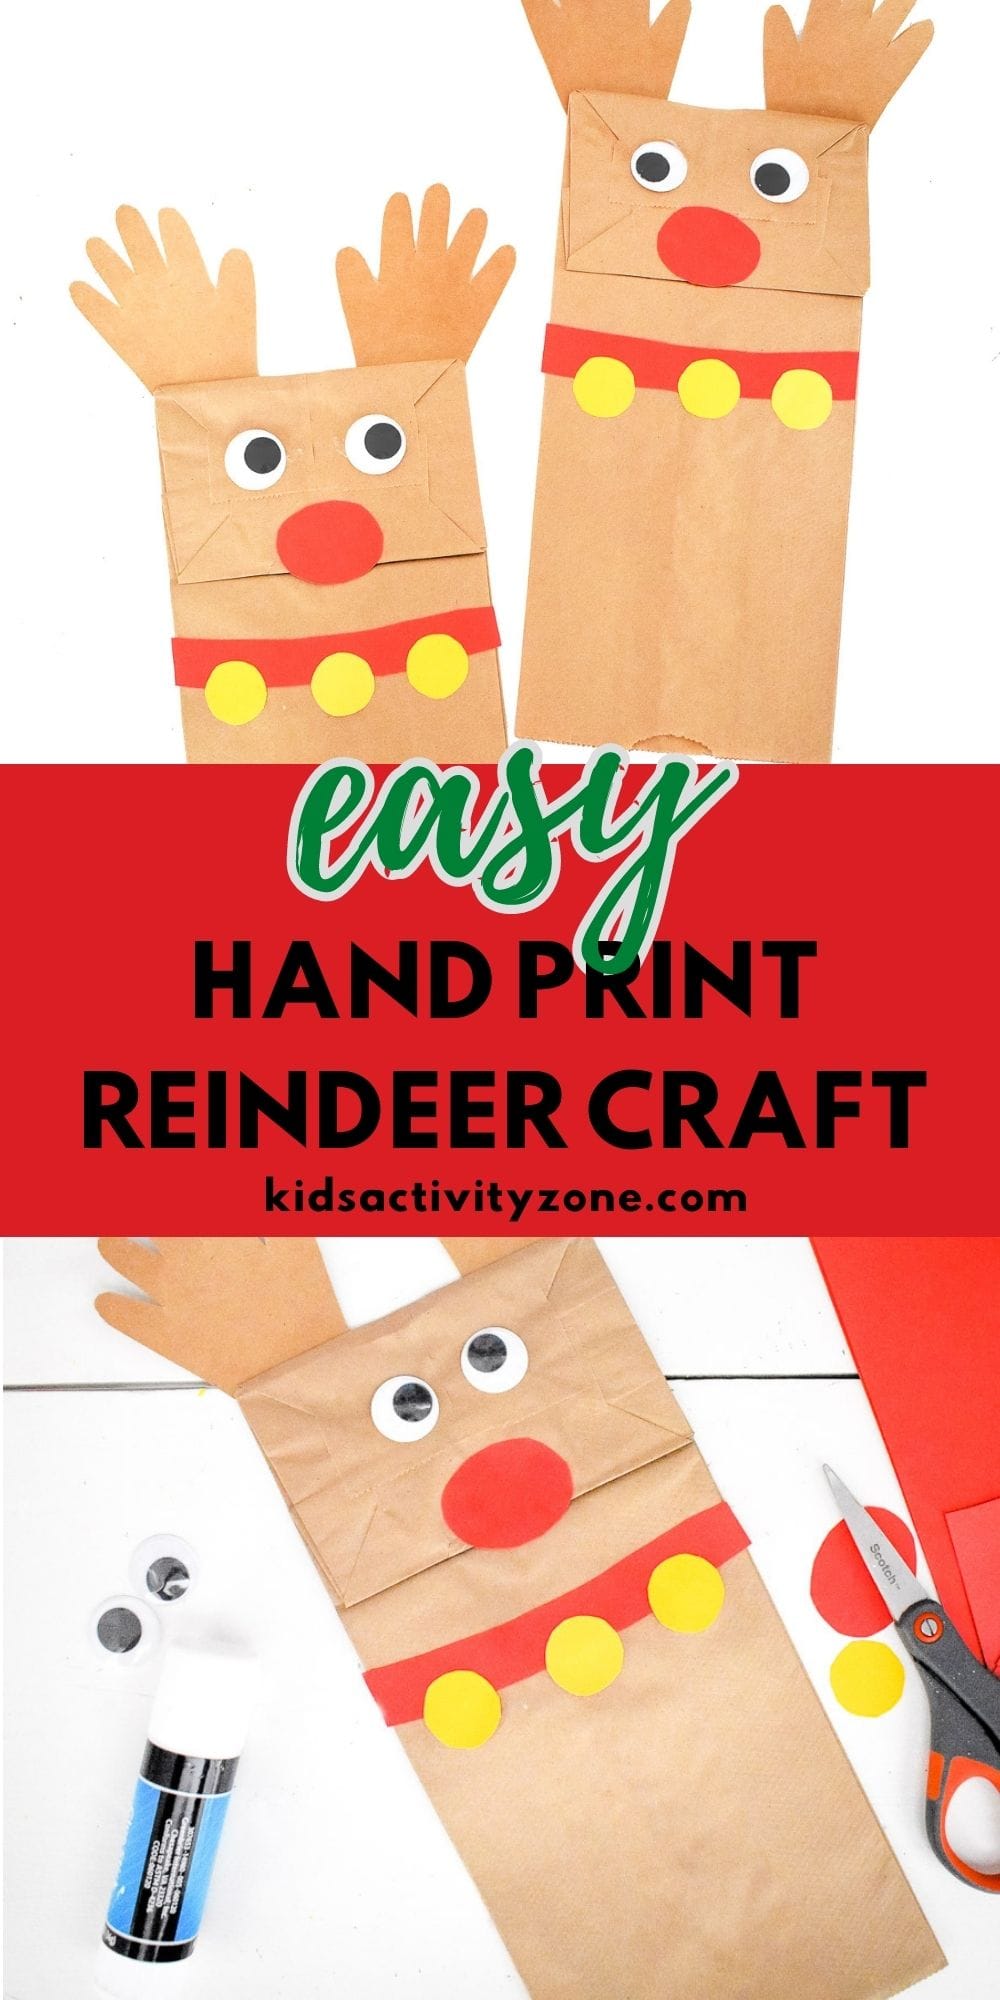 An adorable and easy Christmas craft that anyone can tackle! This Paper Bag Handprint Reindeer Craft needs minimal supplies and is quick and easy to make. Perfect for toddlers and preschoolers. Simply cut out the handprints, glue onto a paper bag, decorate and you have yourself a cute little reindeer the kids will love!